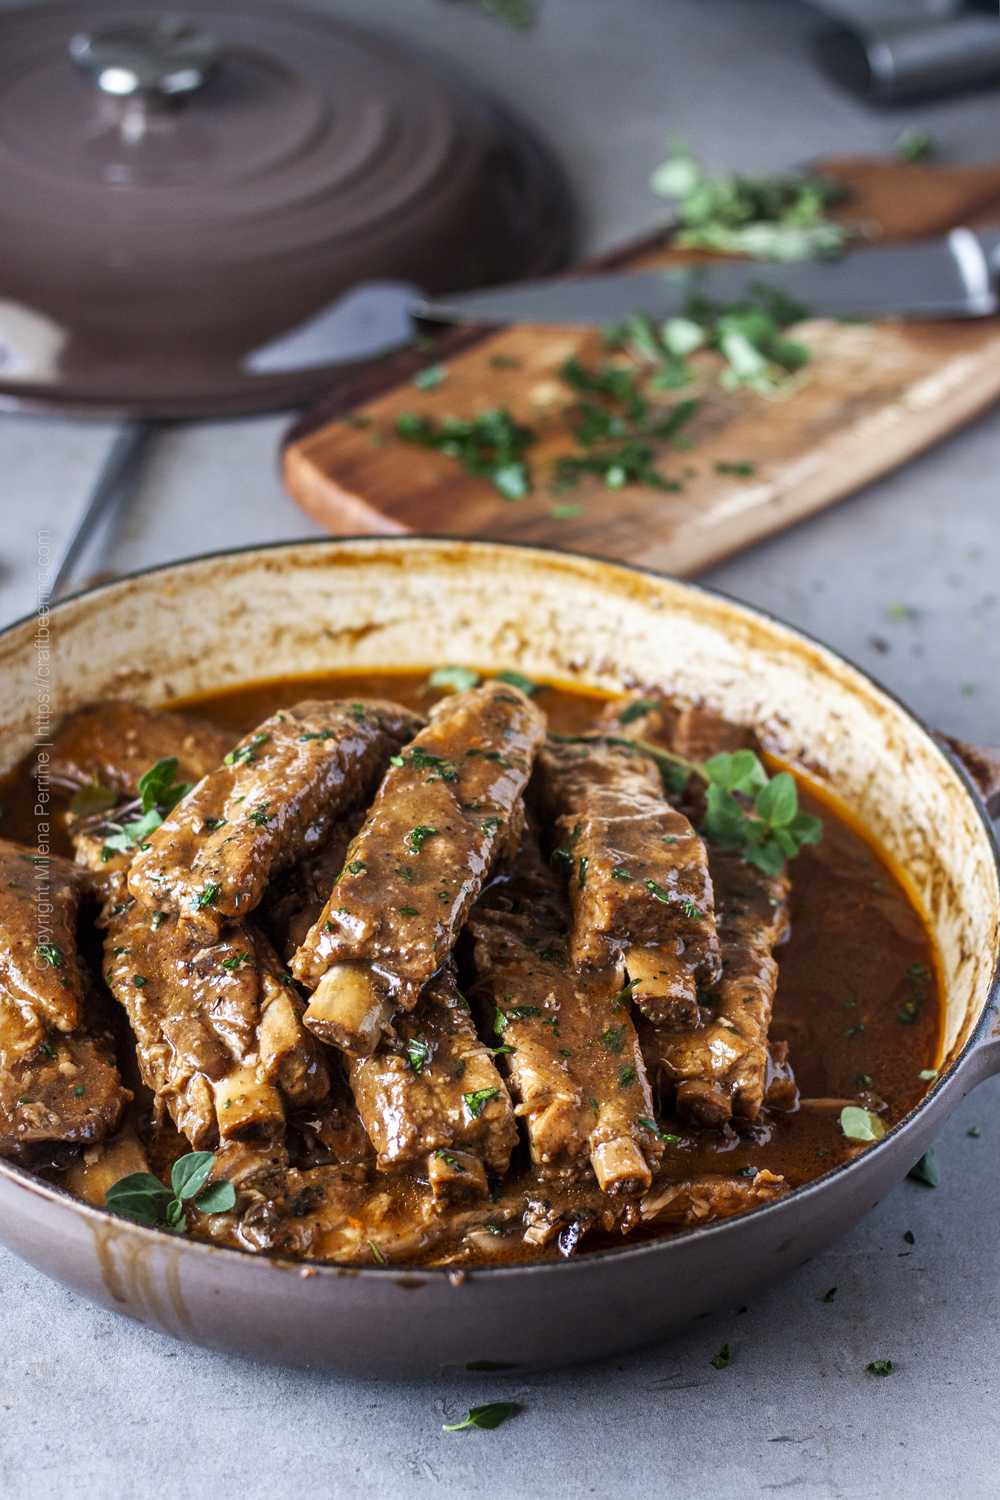 Braised pork spare ribs with beer